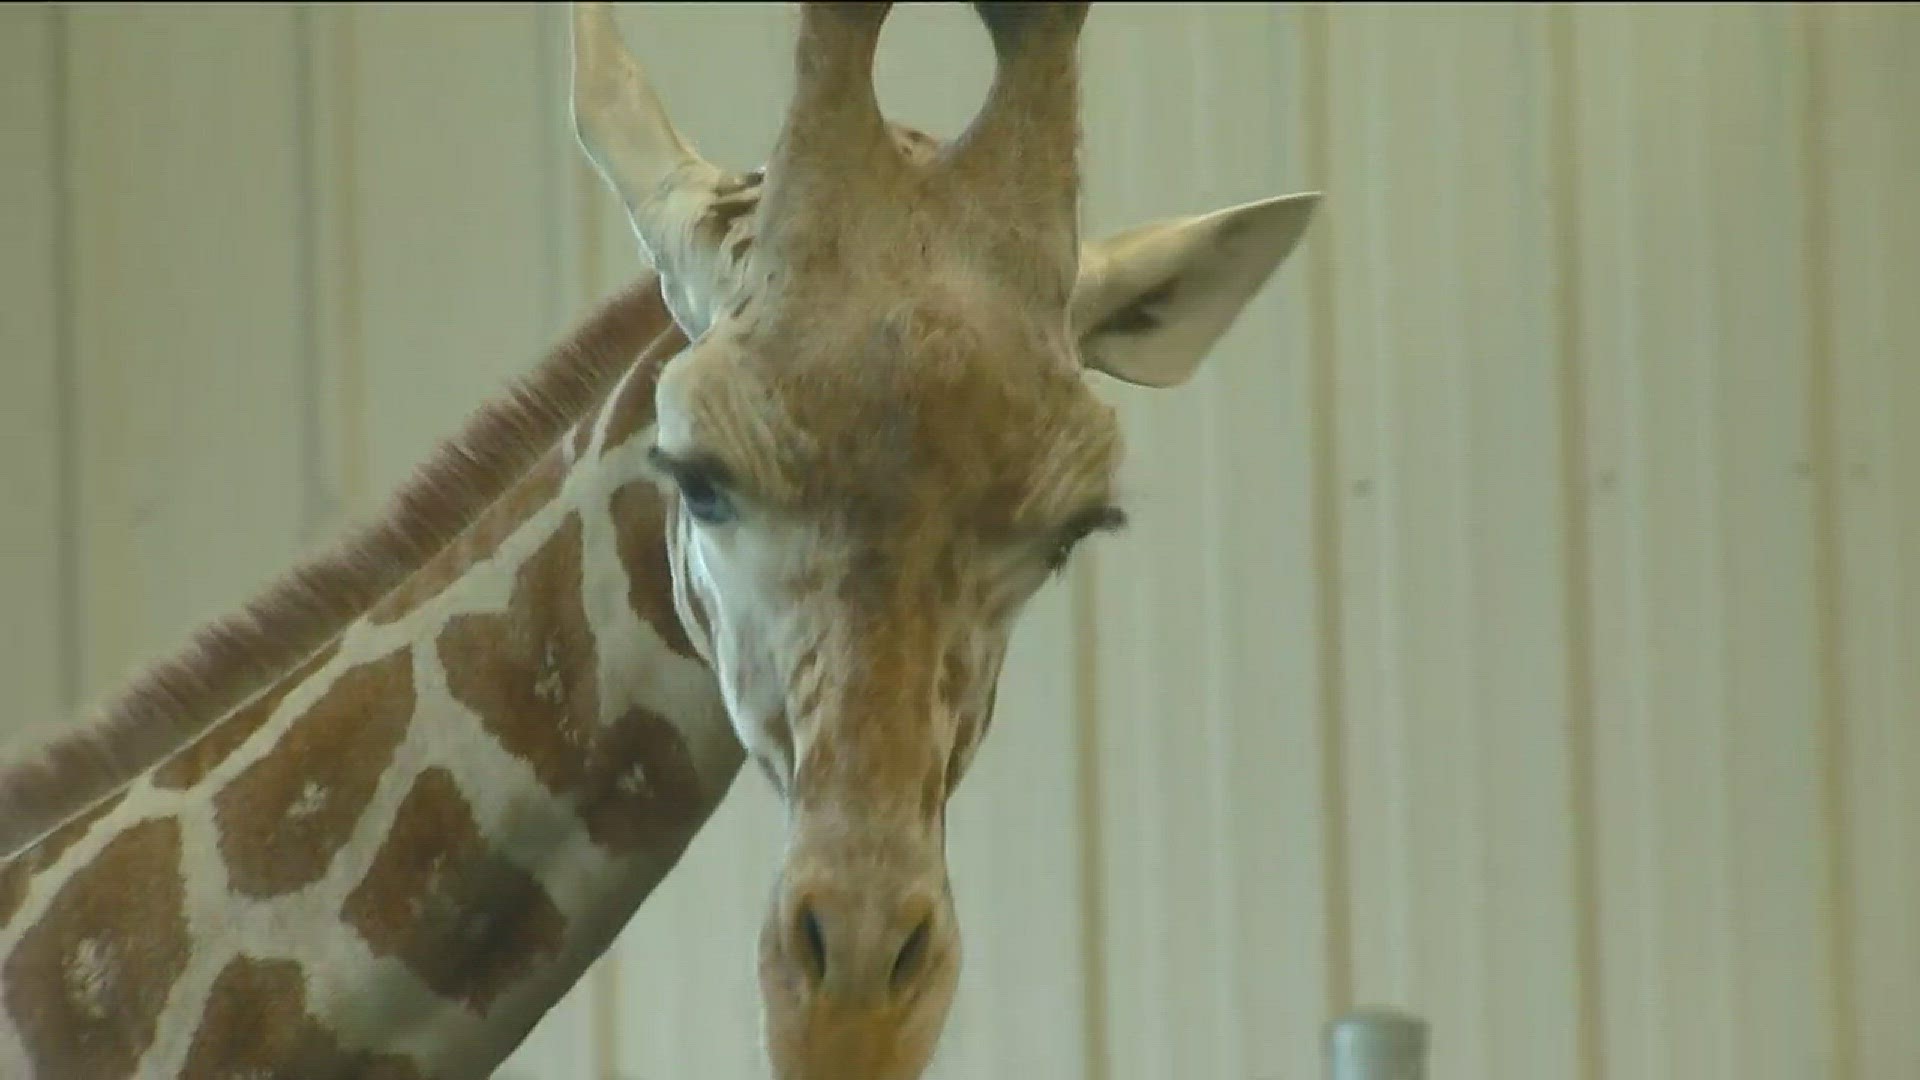 The 2-year-old male giraffe is settling into his new home.